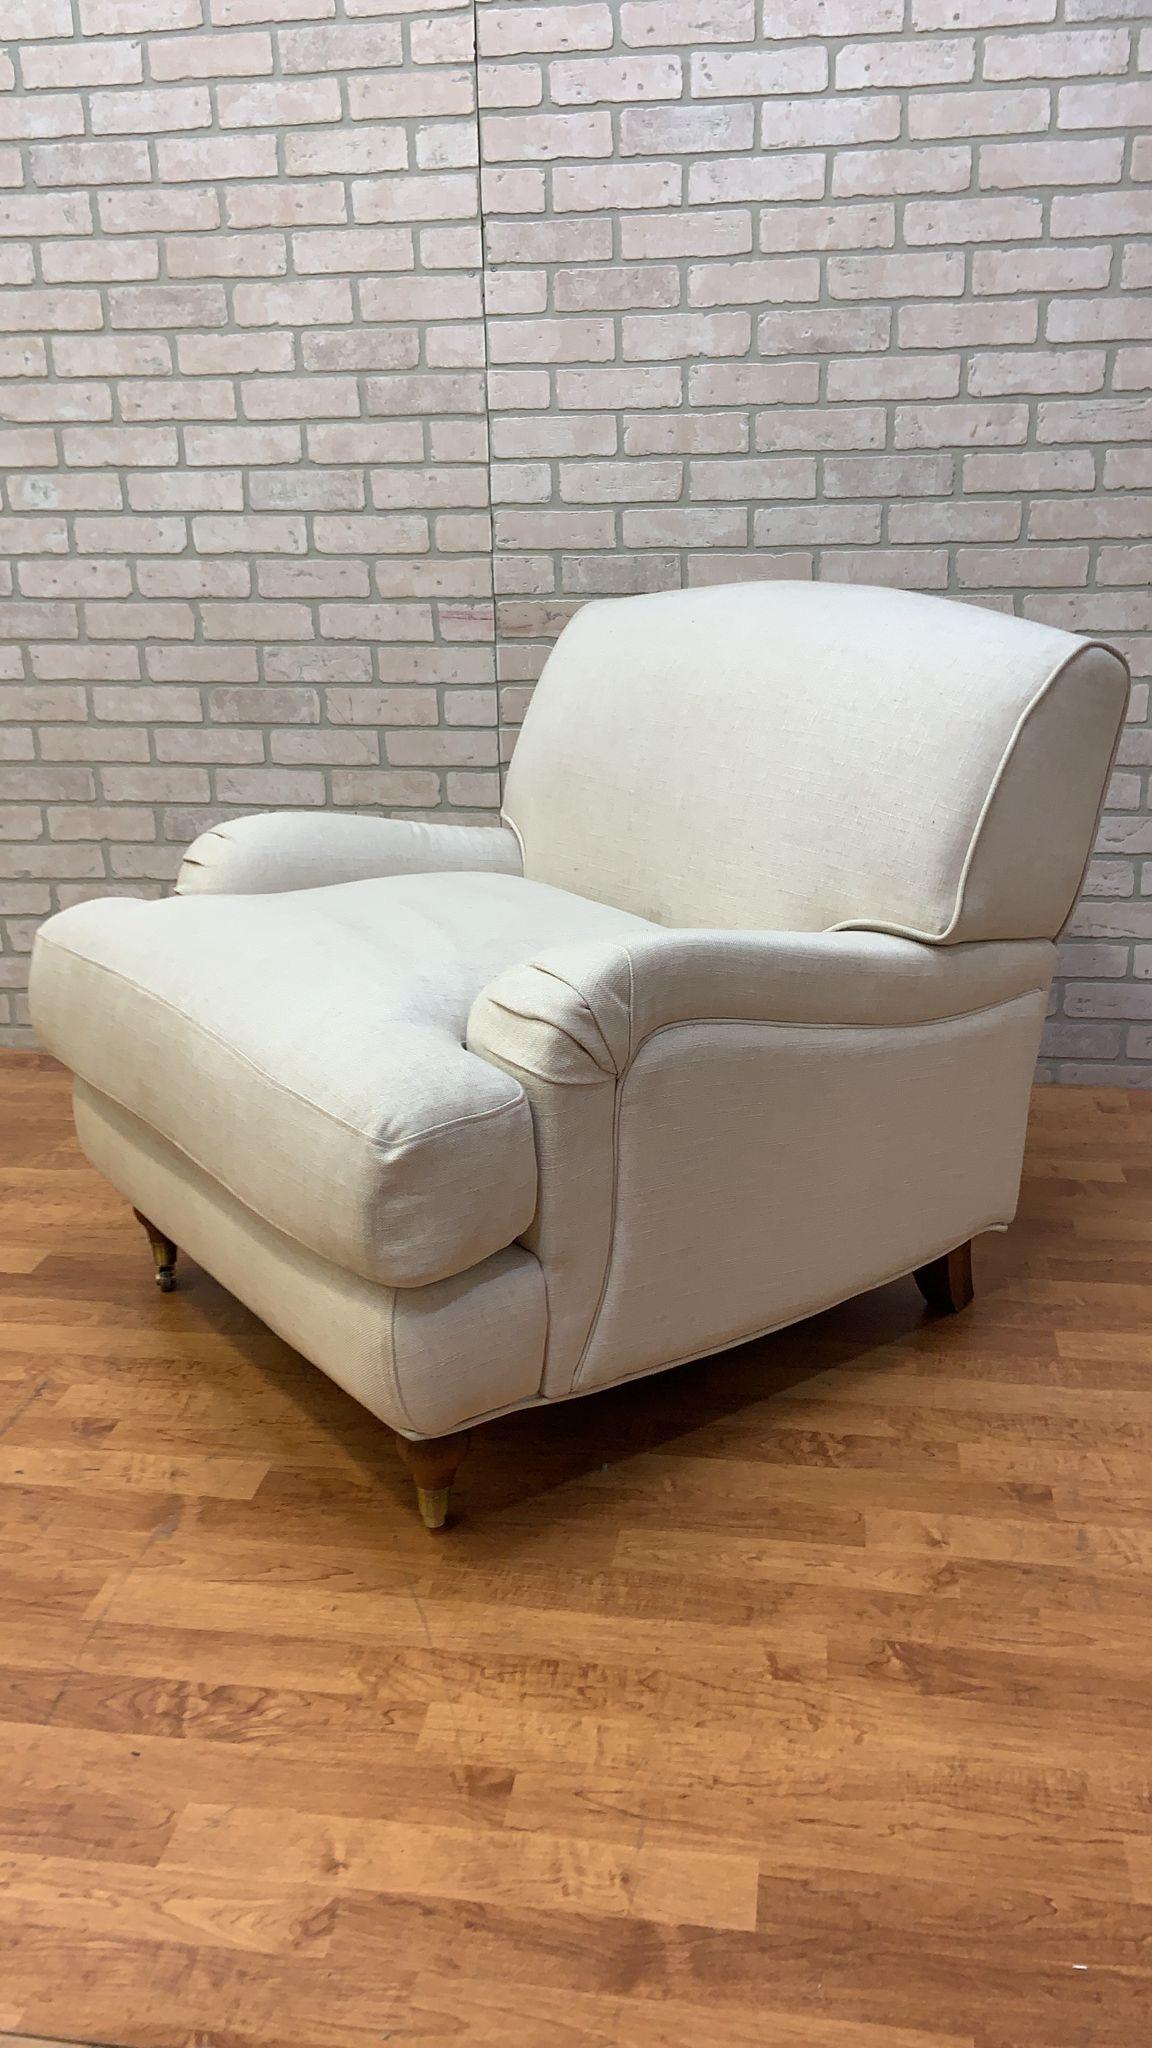 American Vintage Rolled Arm Sydney Club Chair Upholstered in Cream Linen For Sale